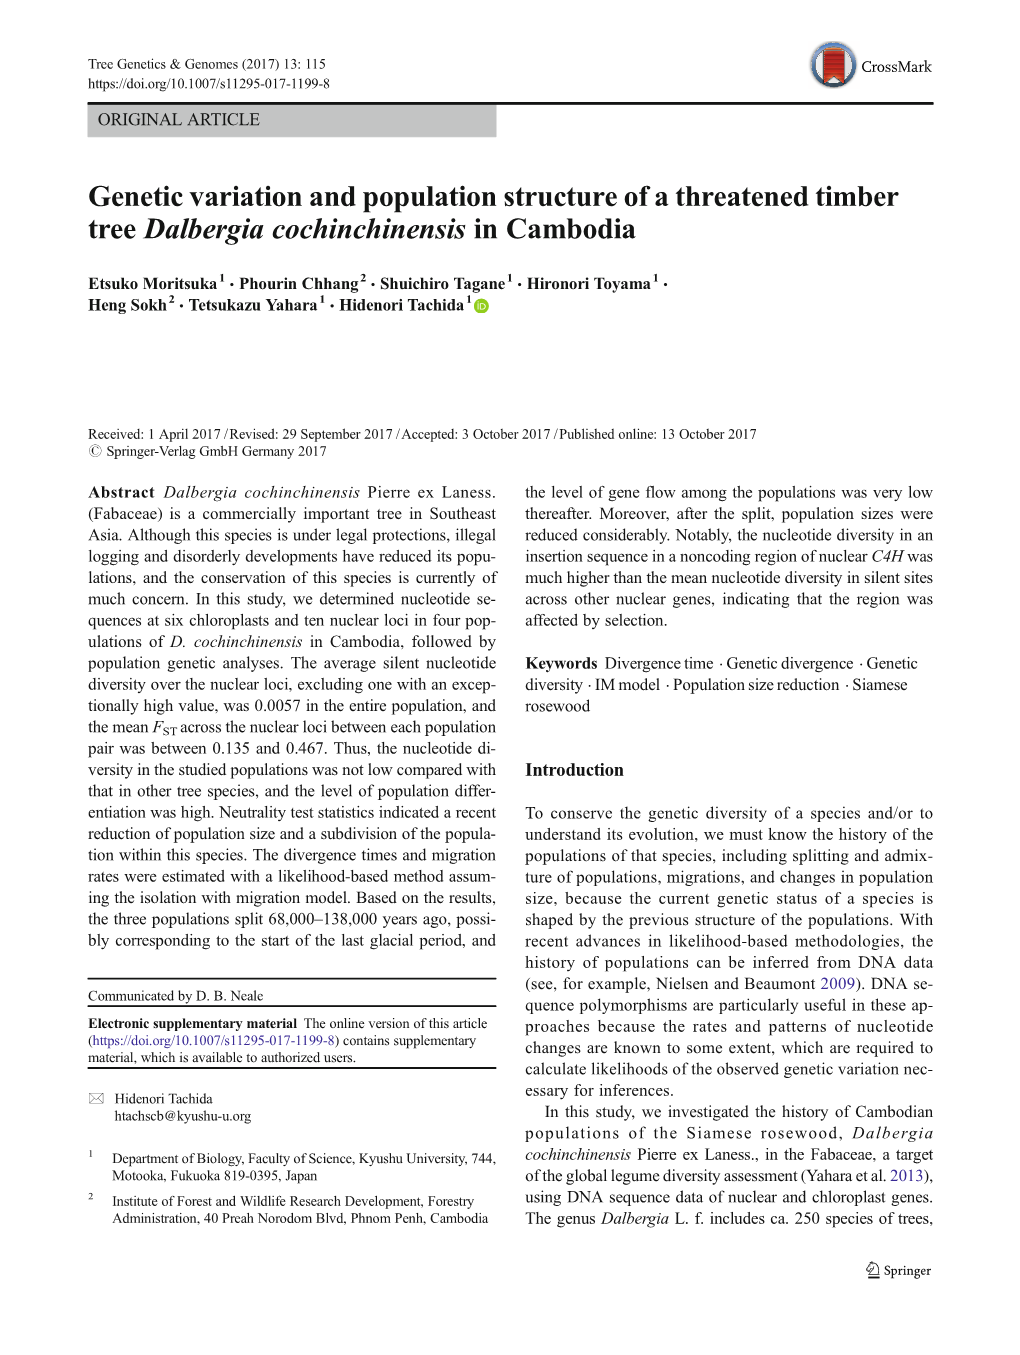 Genetic Variation and Population Structure of a Threatened Timber Tree Dalbergia Cochinchinensis in Cambodia